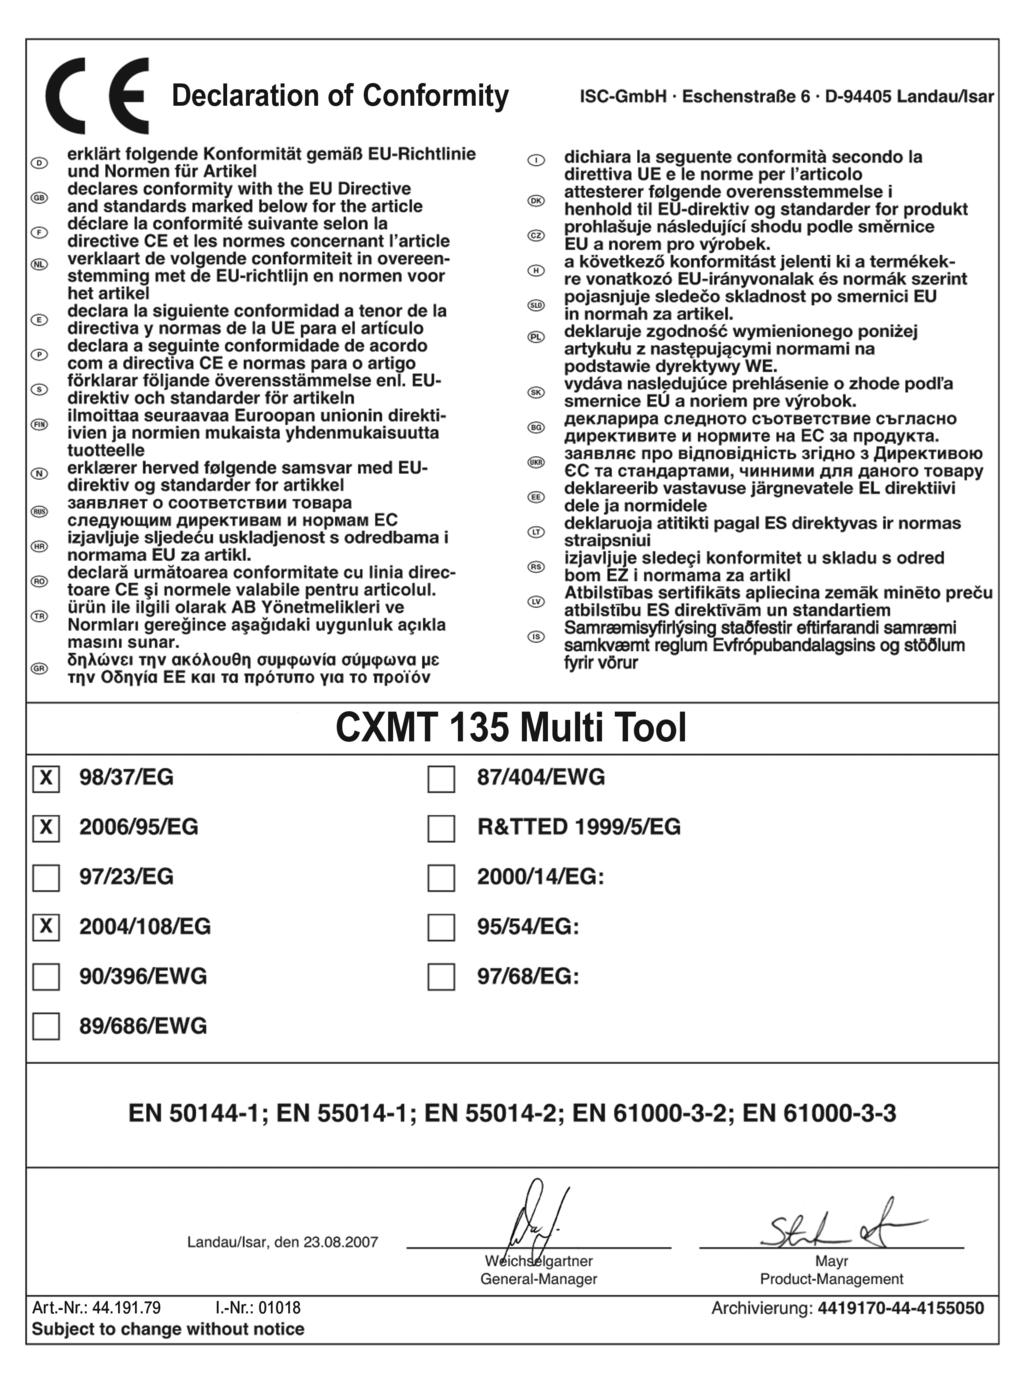 CXMT 135 User Guide 10